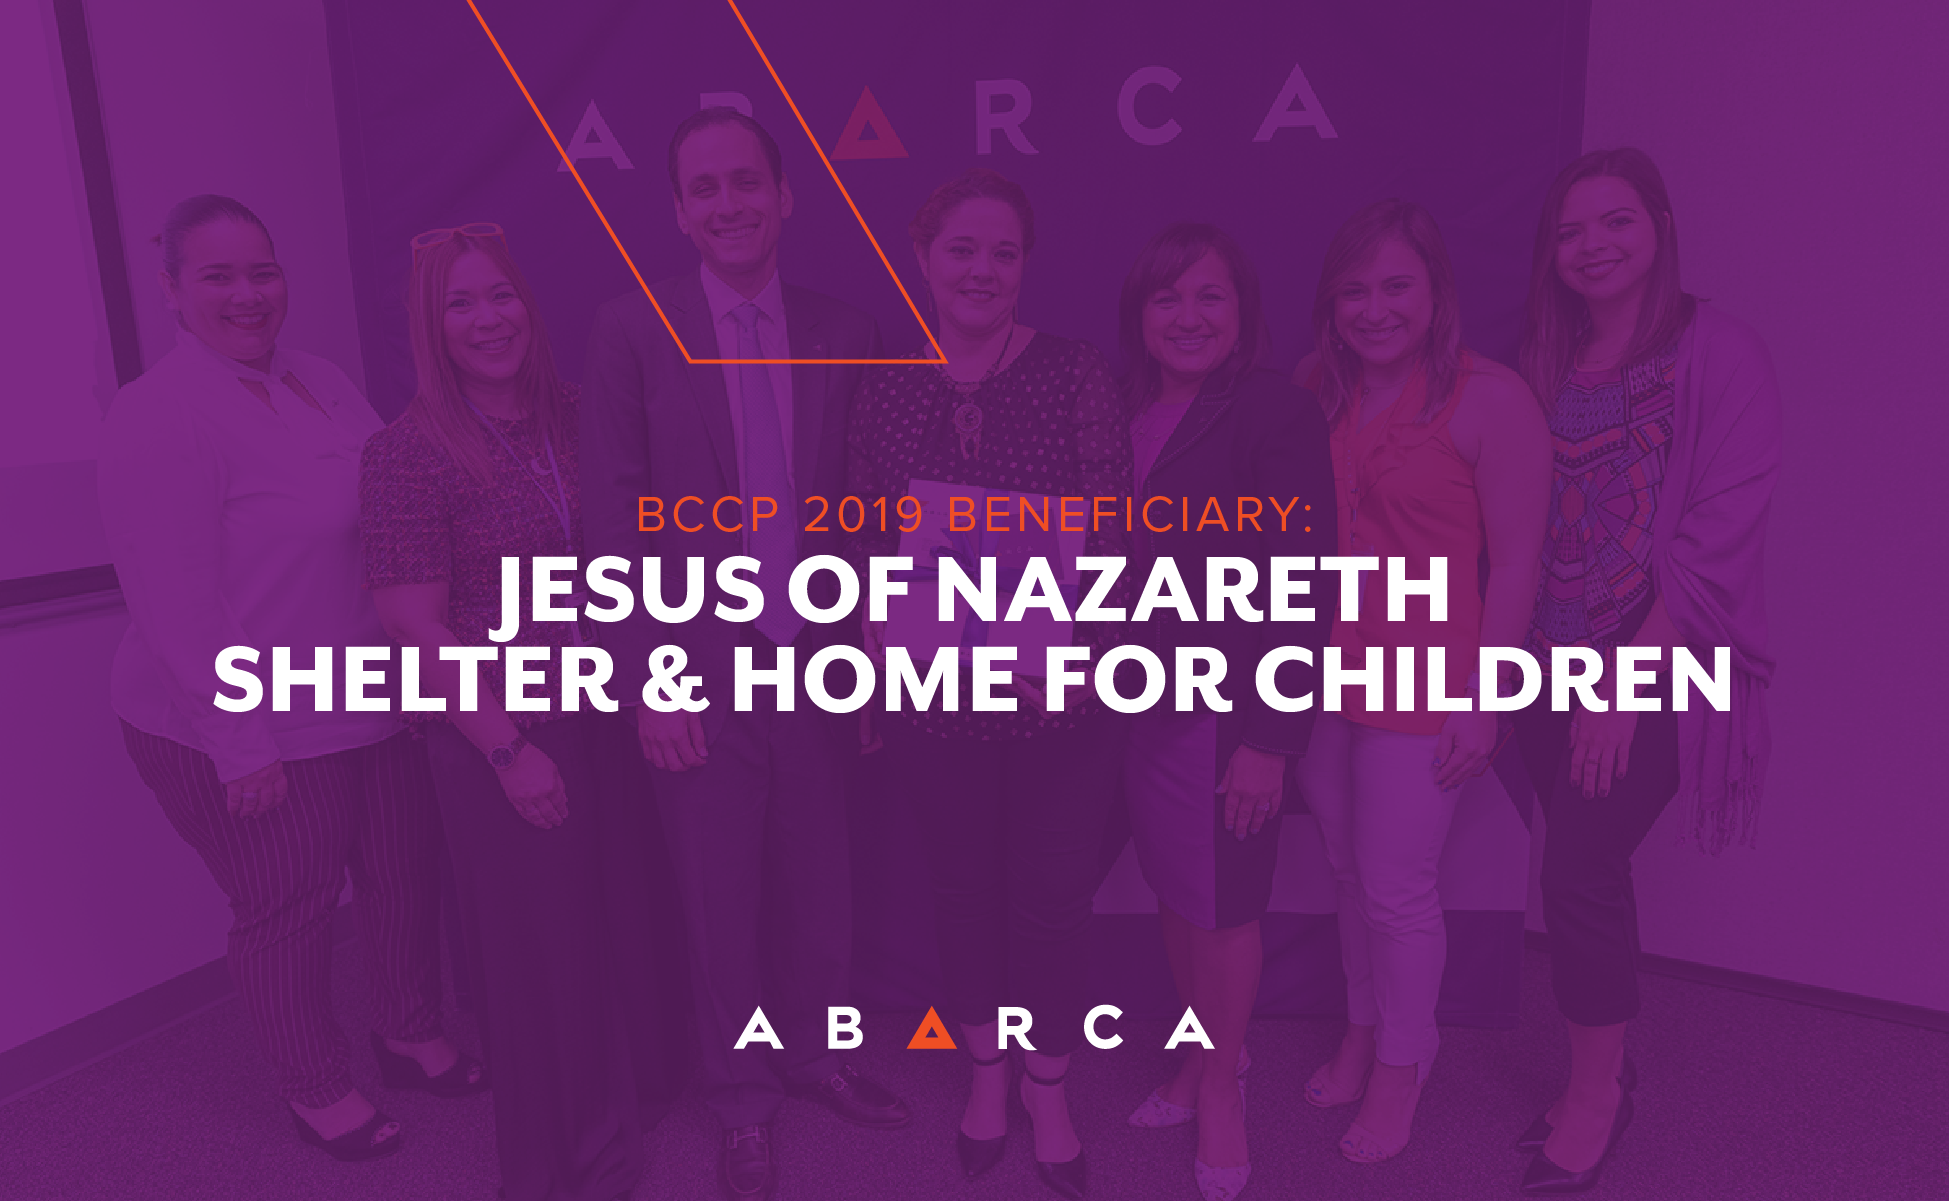 Abarca & Better Care: Transforming the Quality of Life of Children in Need